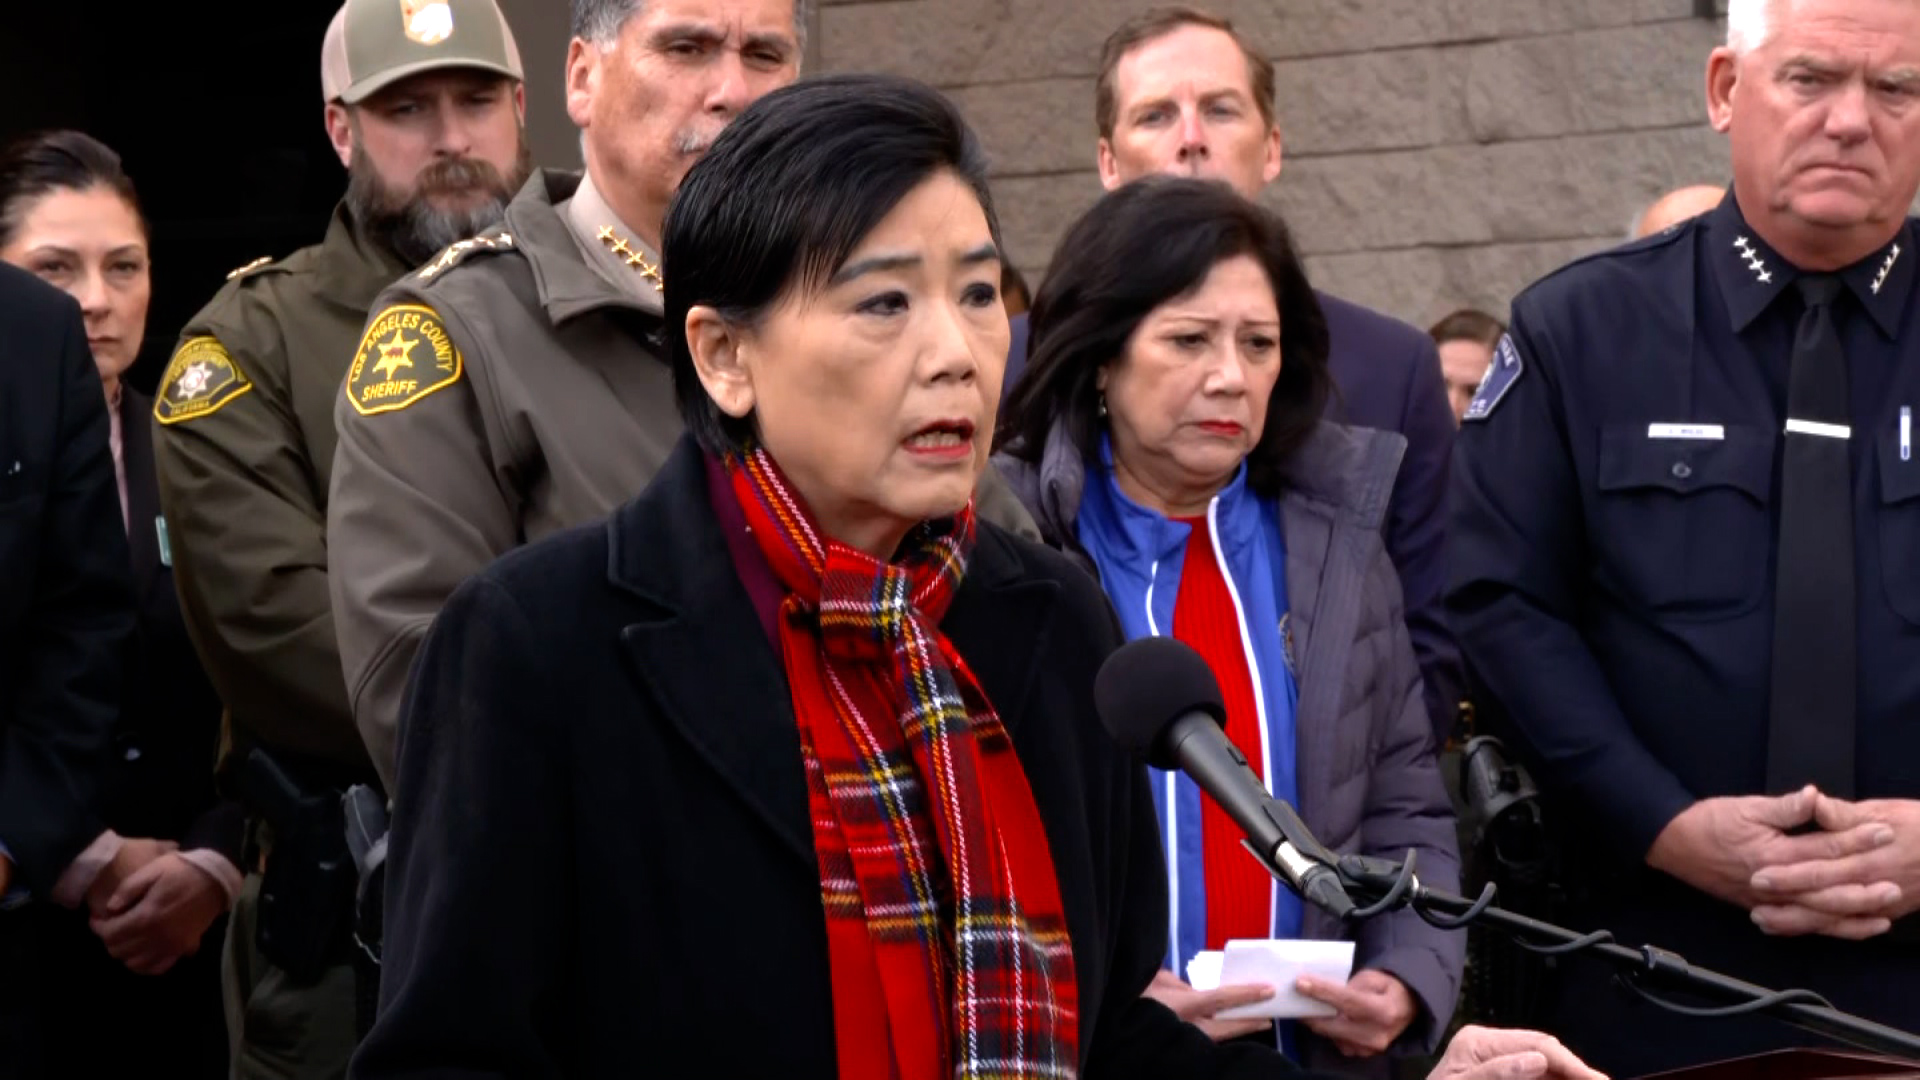 Democratic Rep. Judy Chu speaks during a press conference in Monterey Park, California, on January 22.